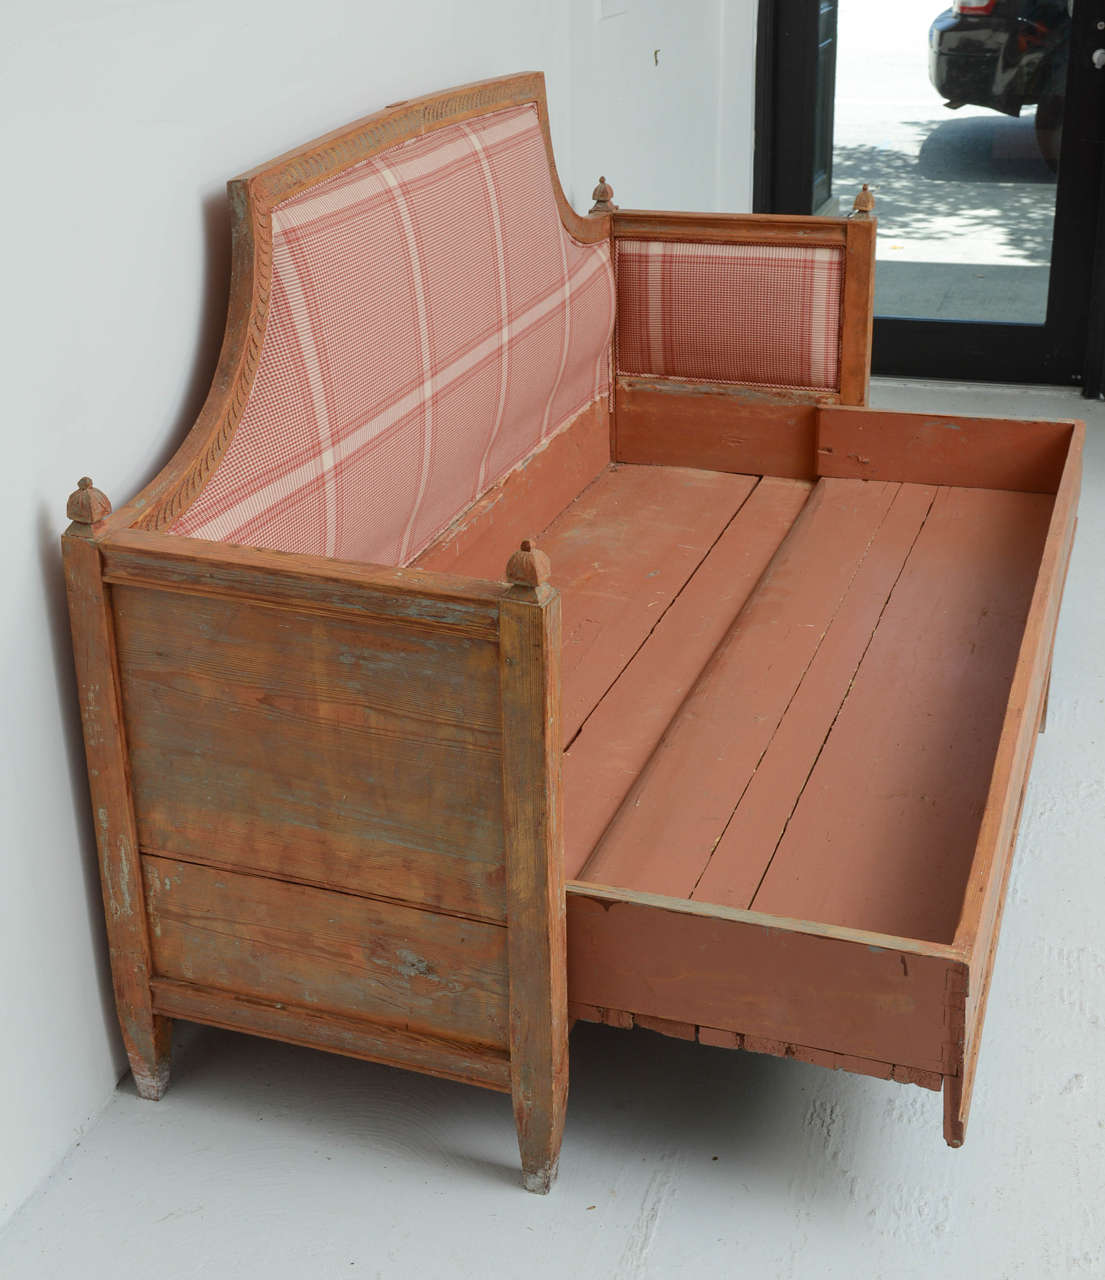 Original Stained Wooden Swedish Bench with Pull-Out Bed, circa 1810 1